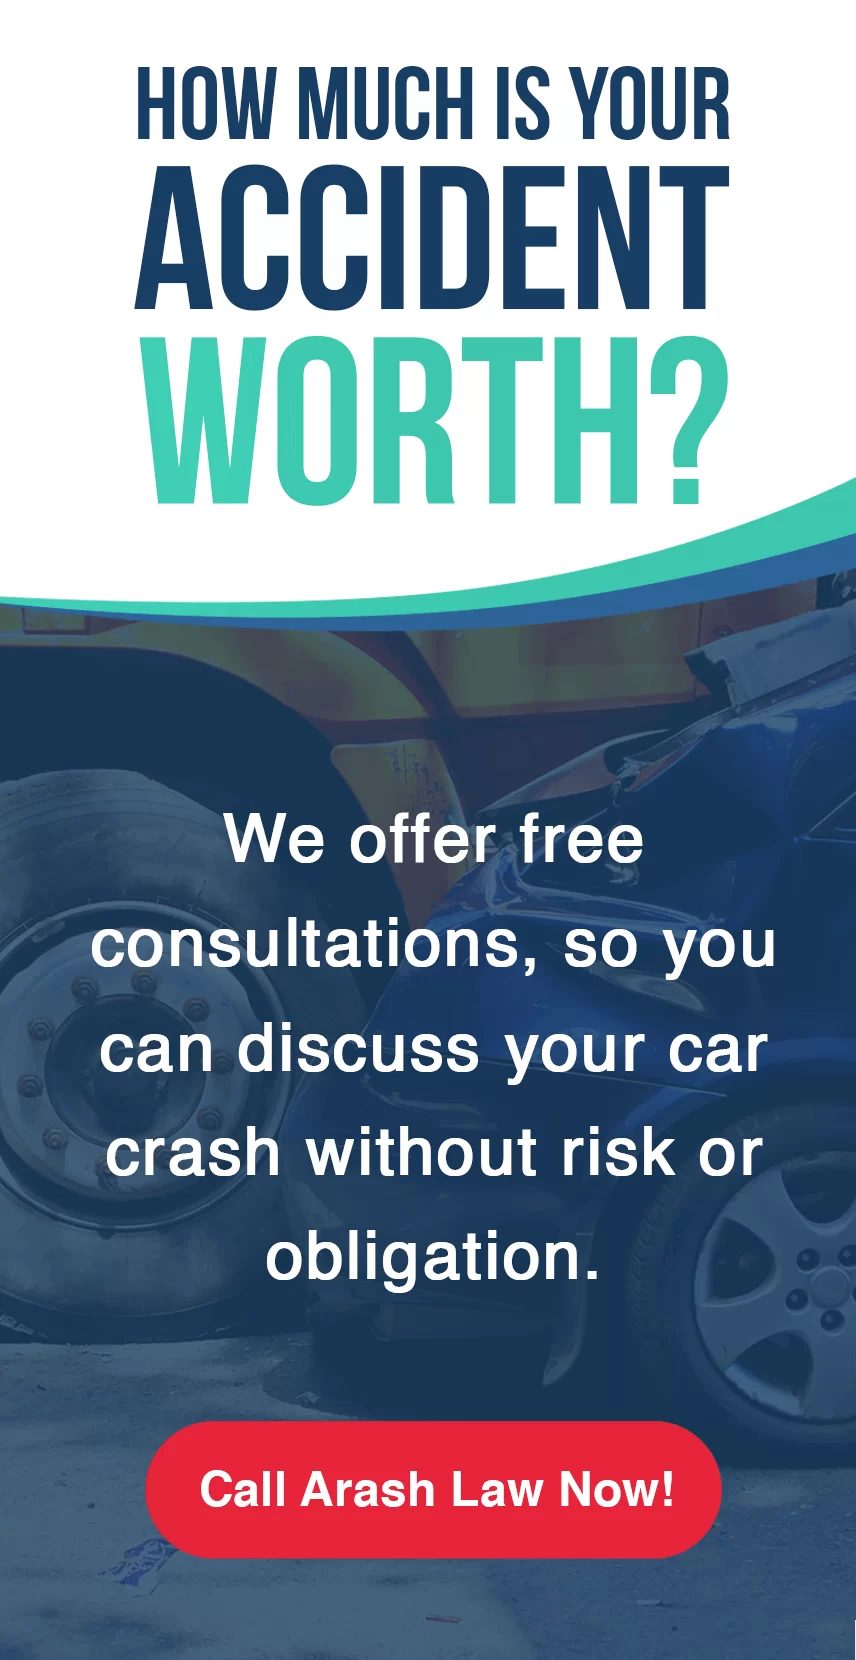 How much is your Accident Worth